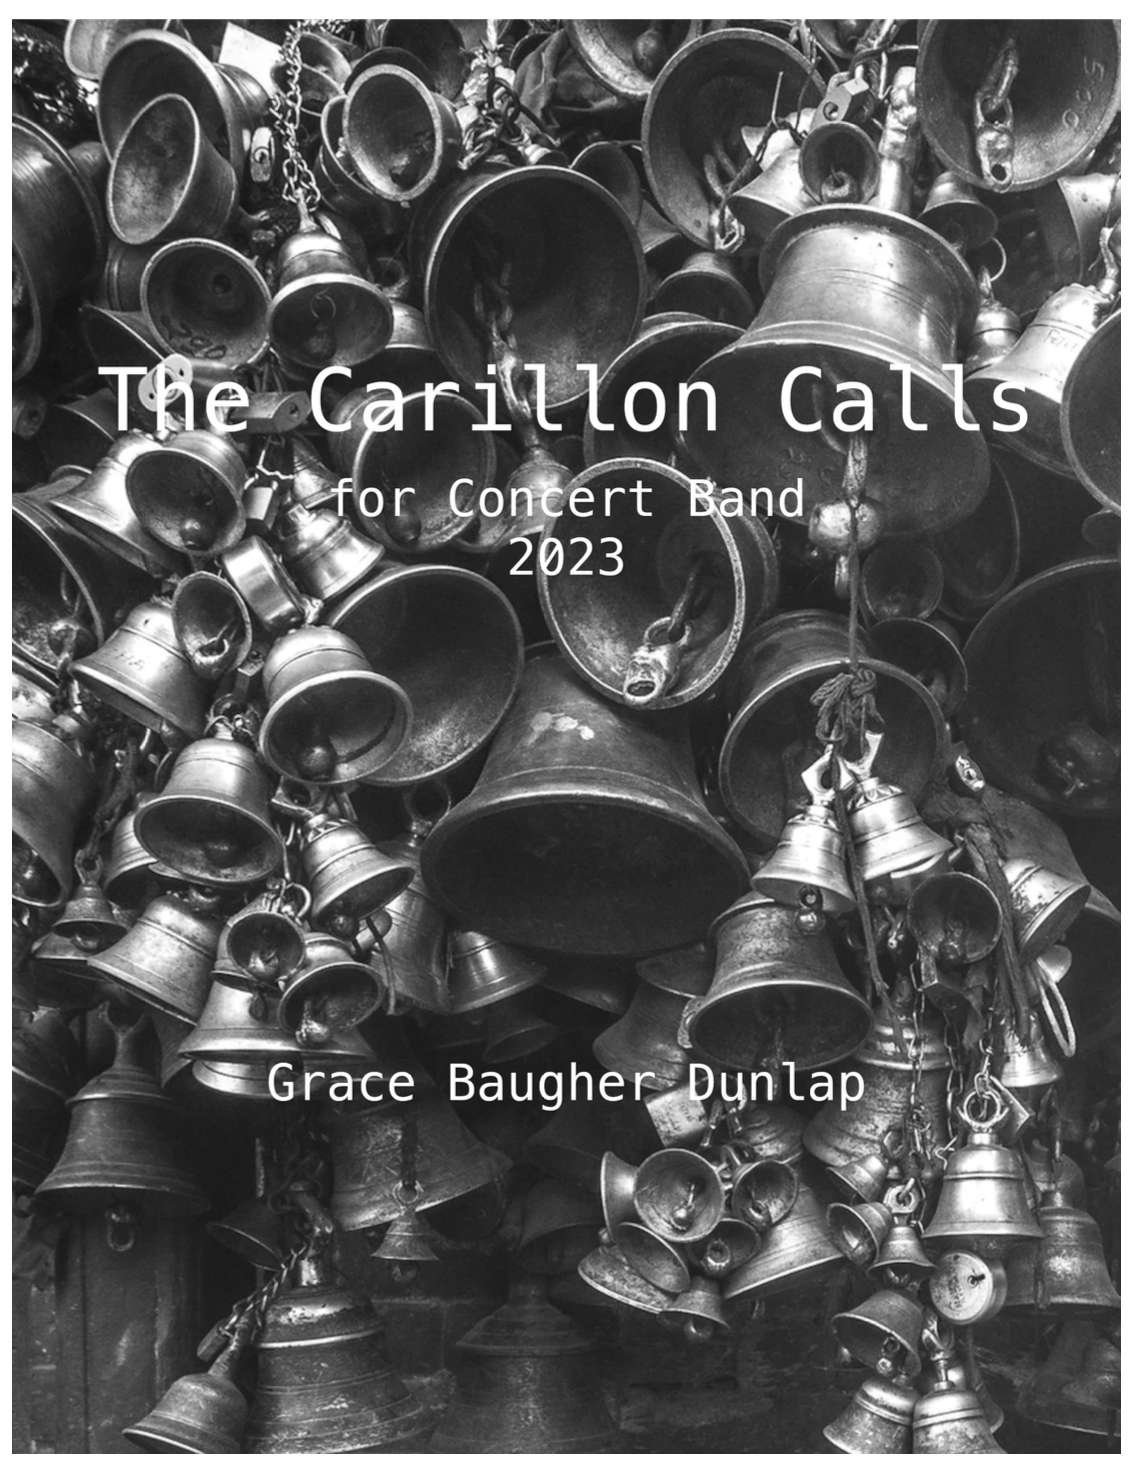 The Carillon Calls by Grace Baugher